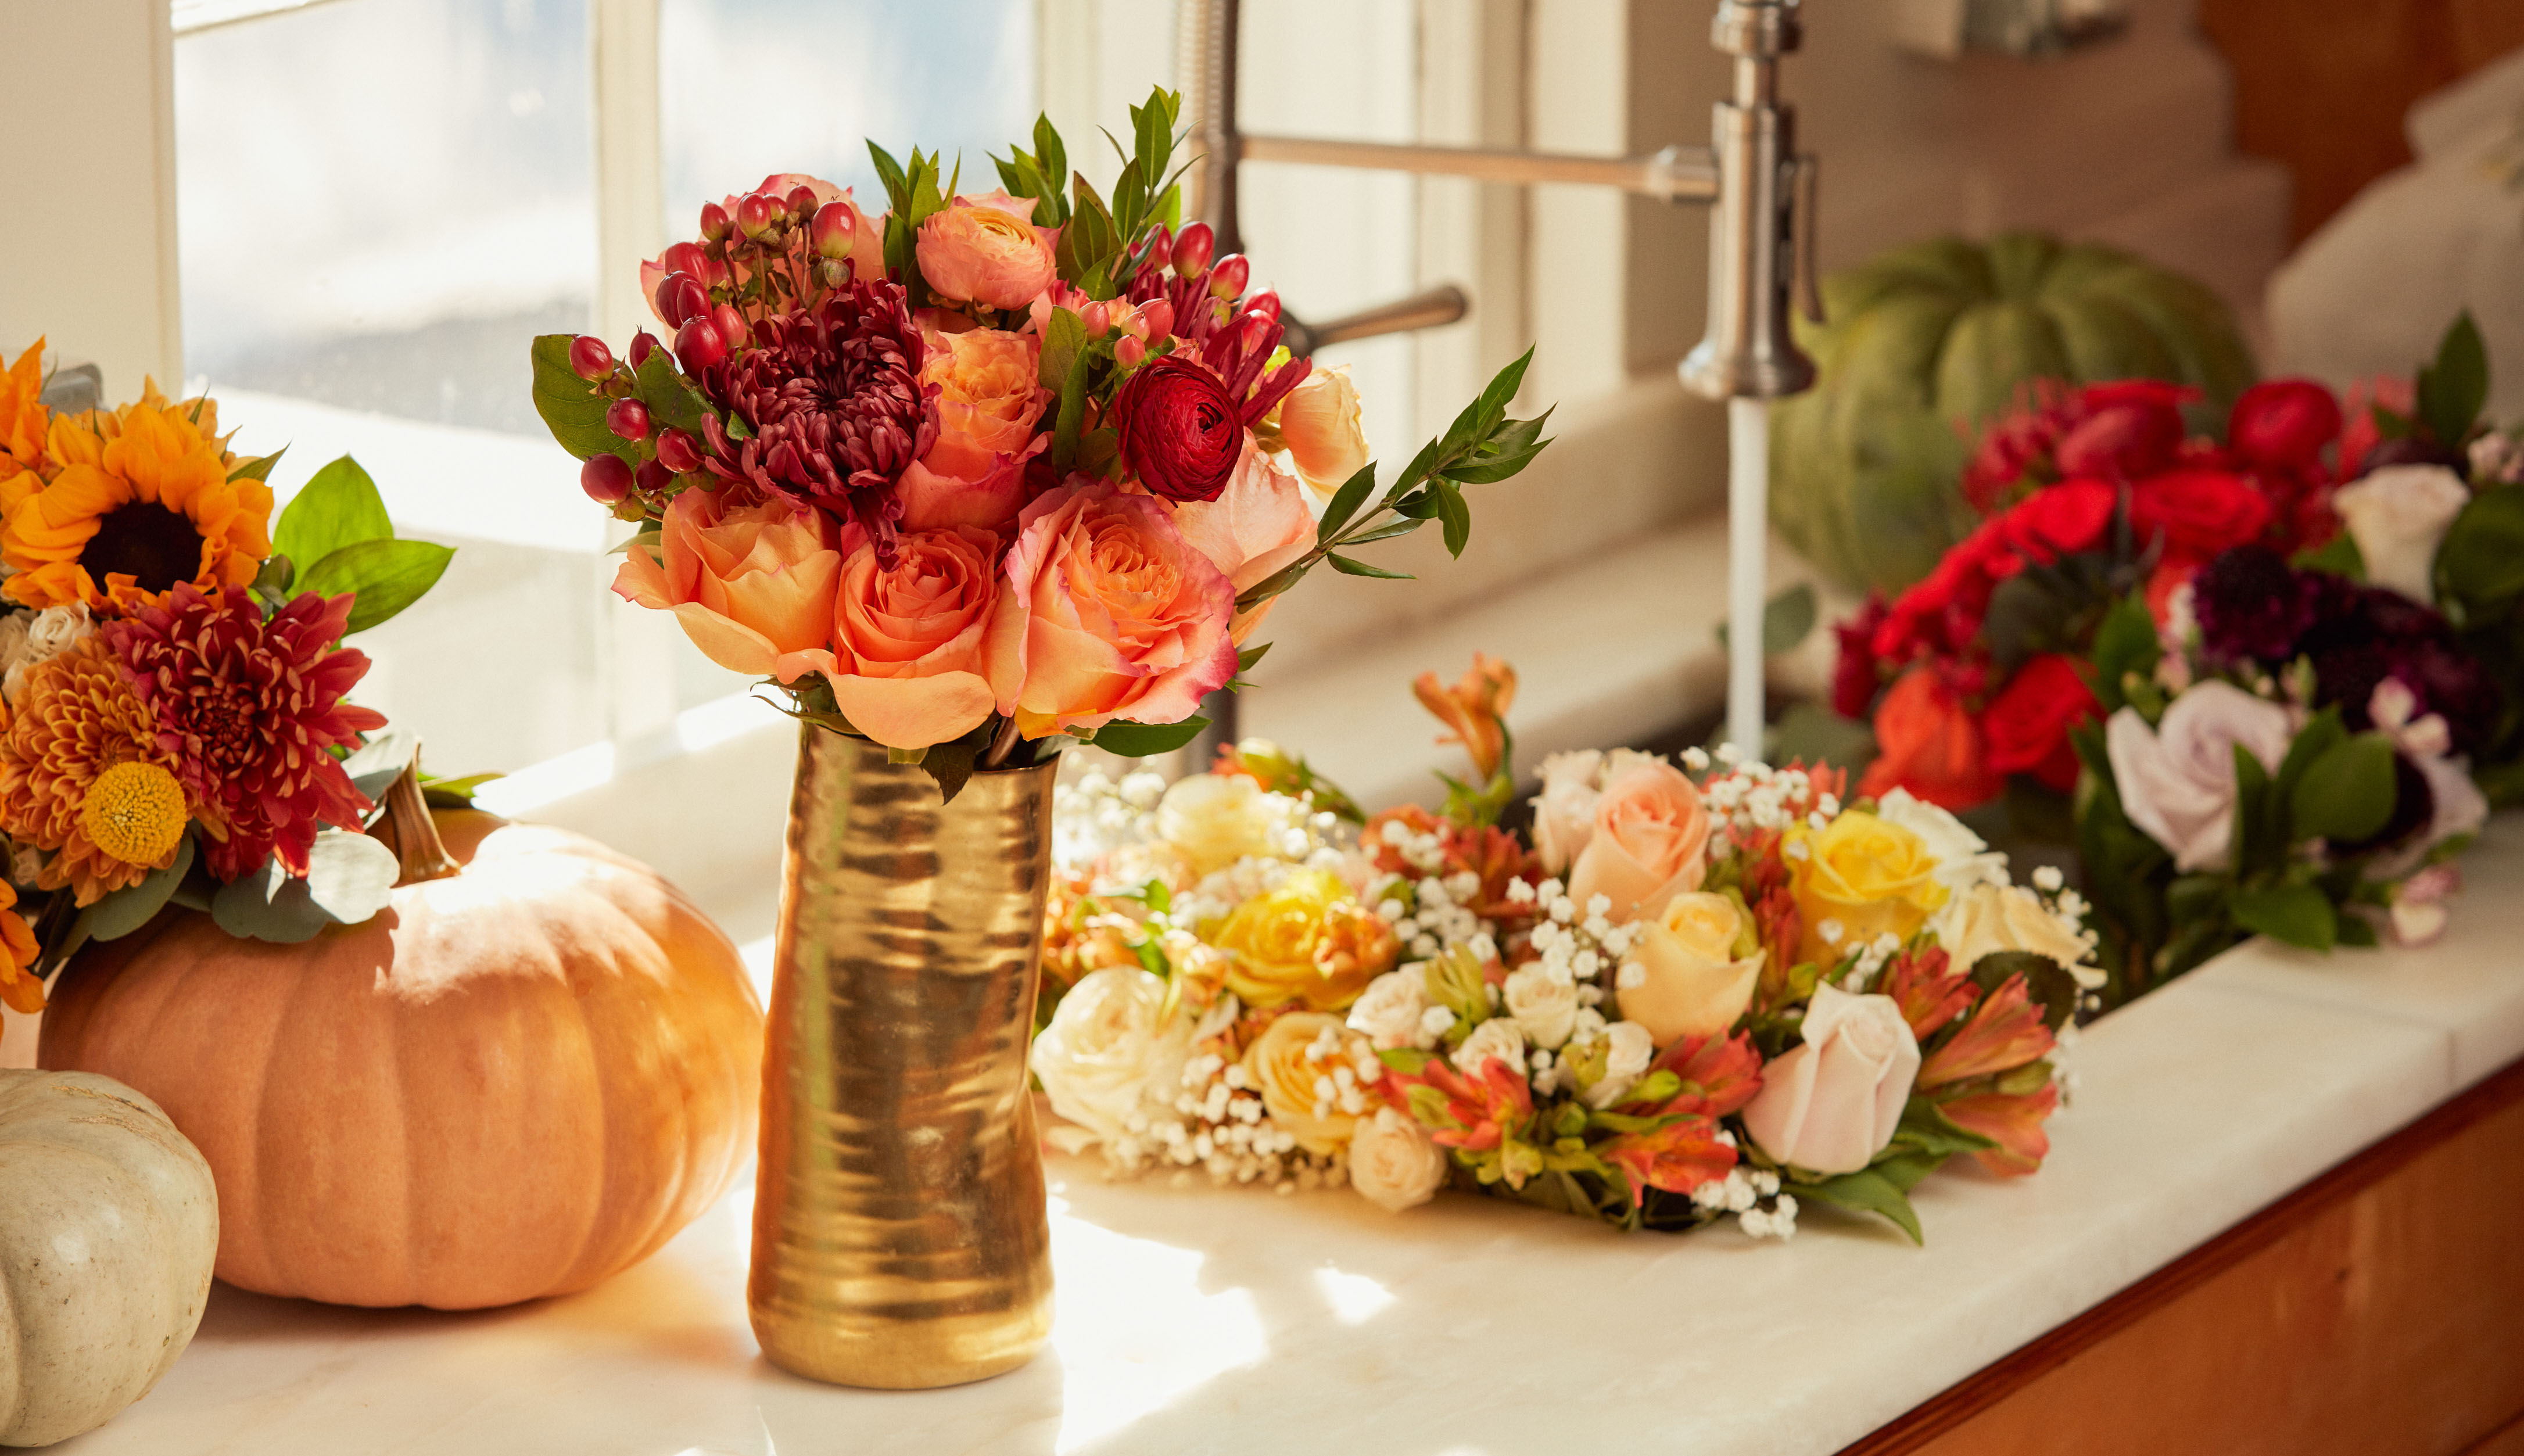 A table set for Thanksgiving 2022 with a floral centerpiece